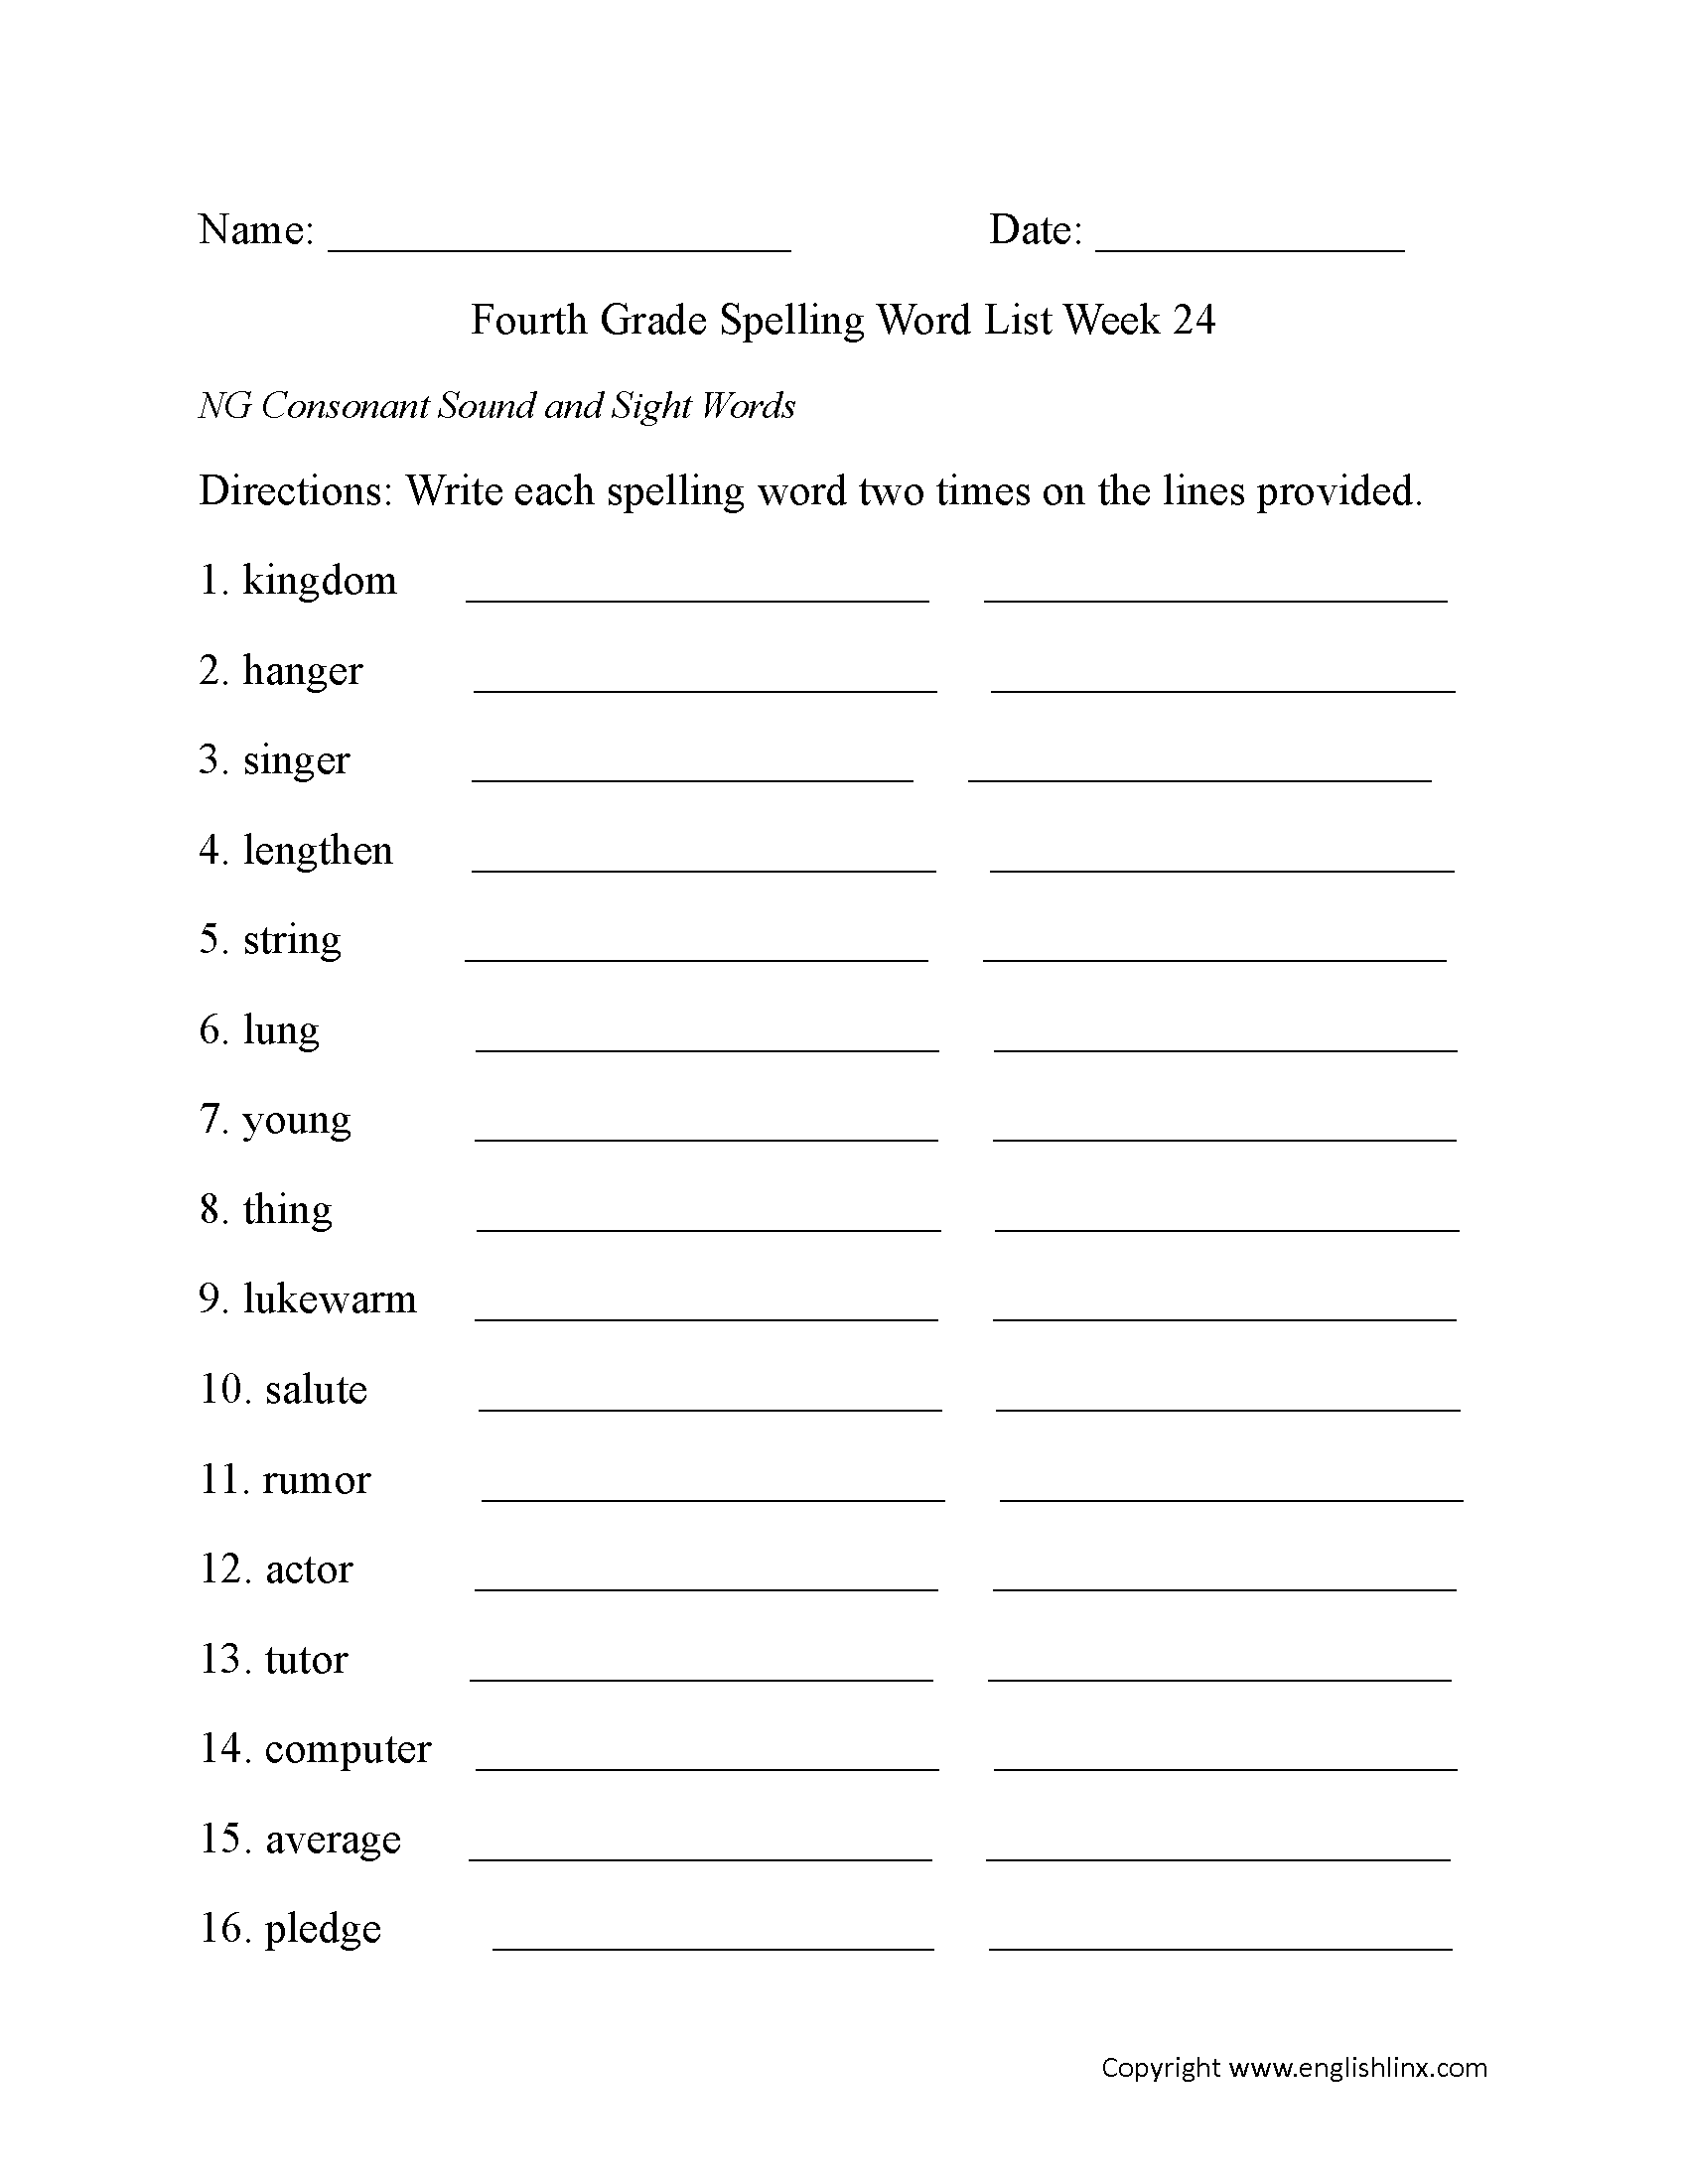 Week 24 NG Consonant and Sight Words Fourth Grade Spelling Words Worksheets